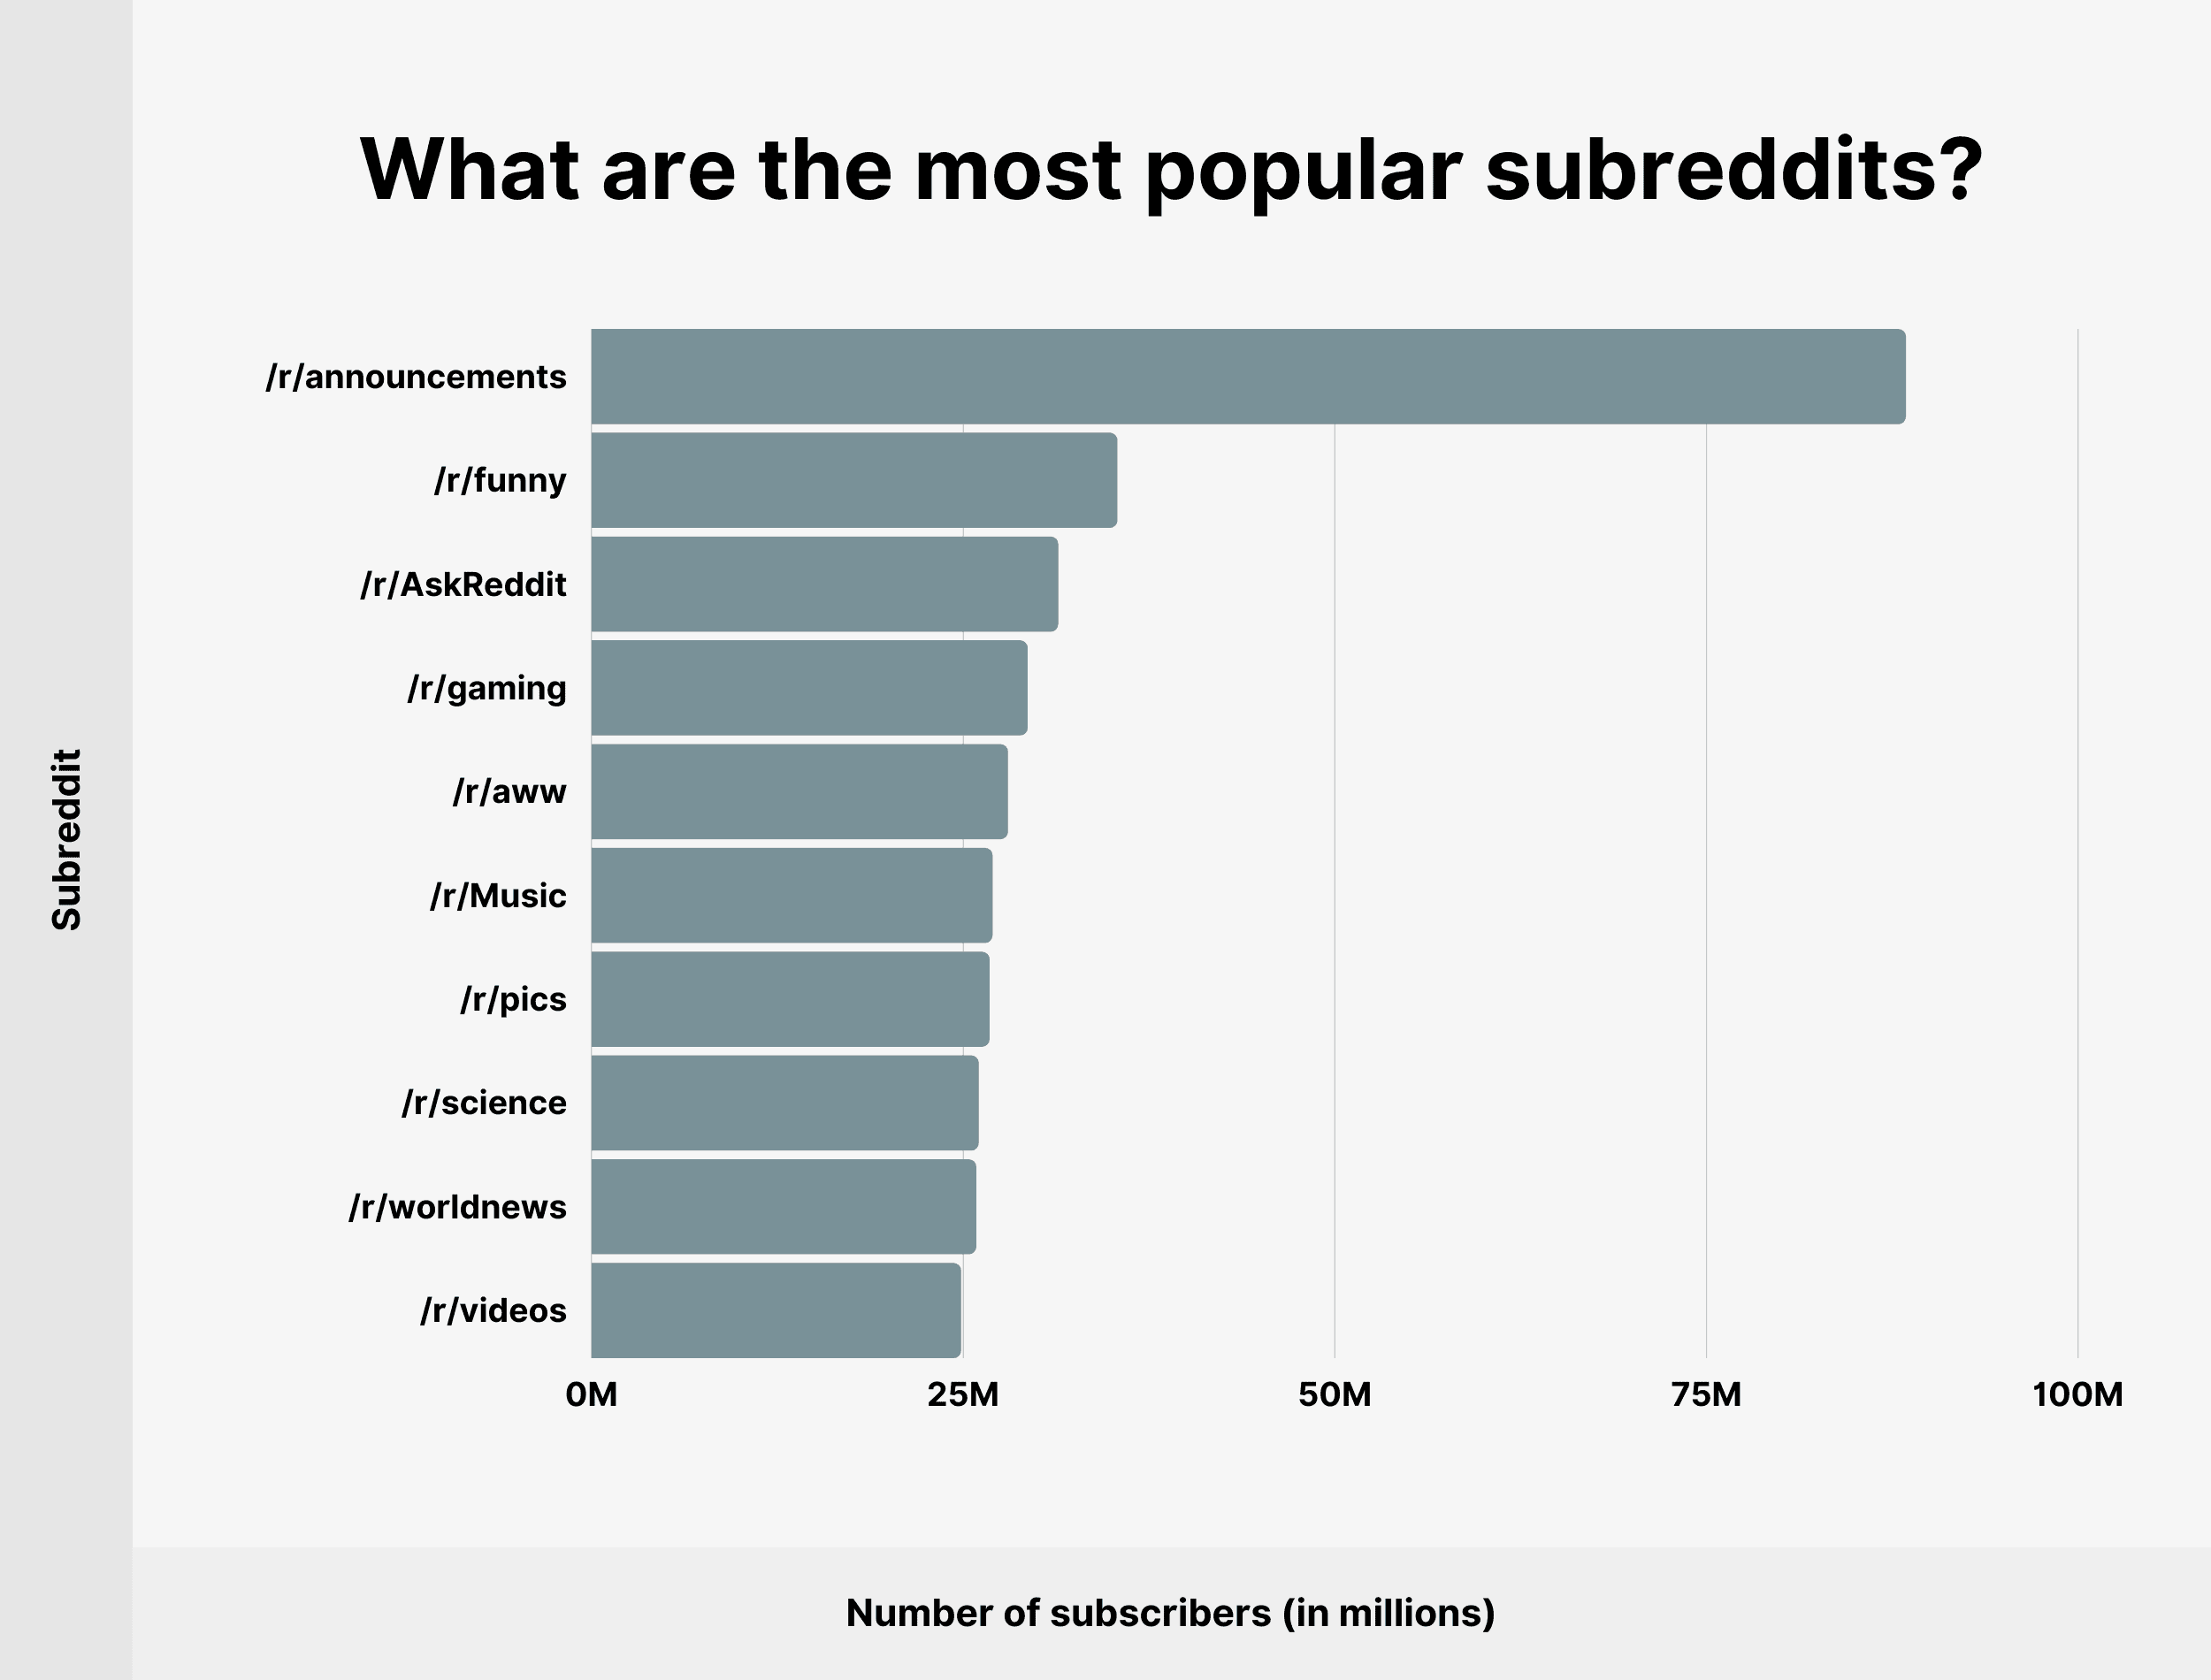 What are the most popular subreddits?